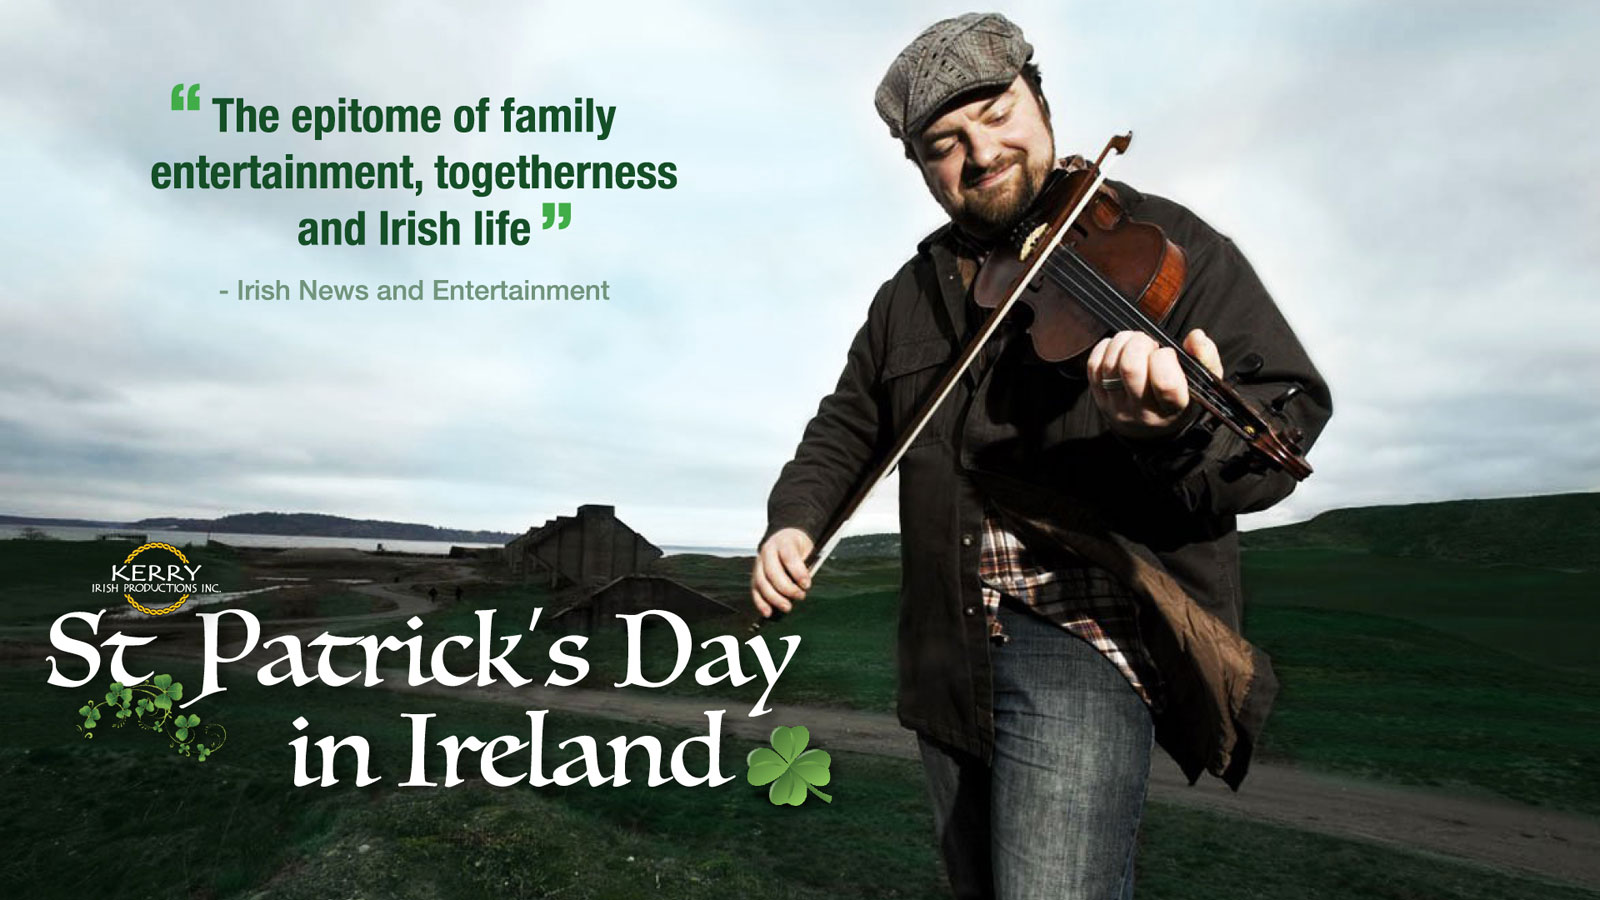 Man fiddling in front of Irish countryside